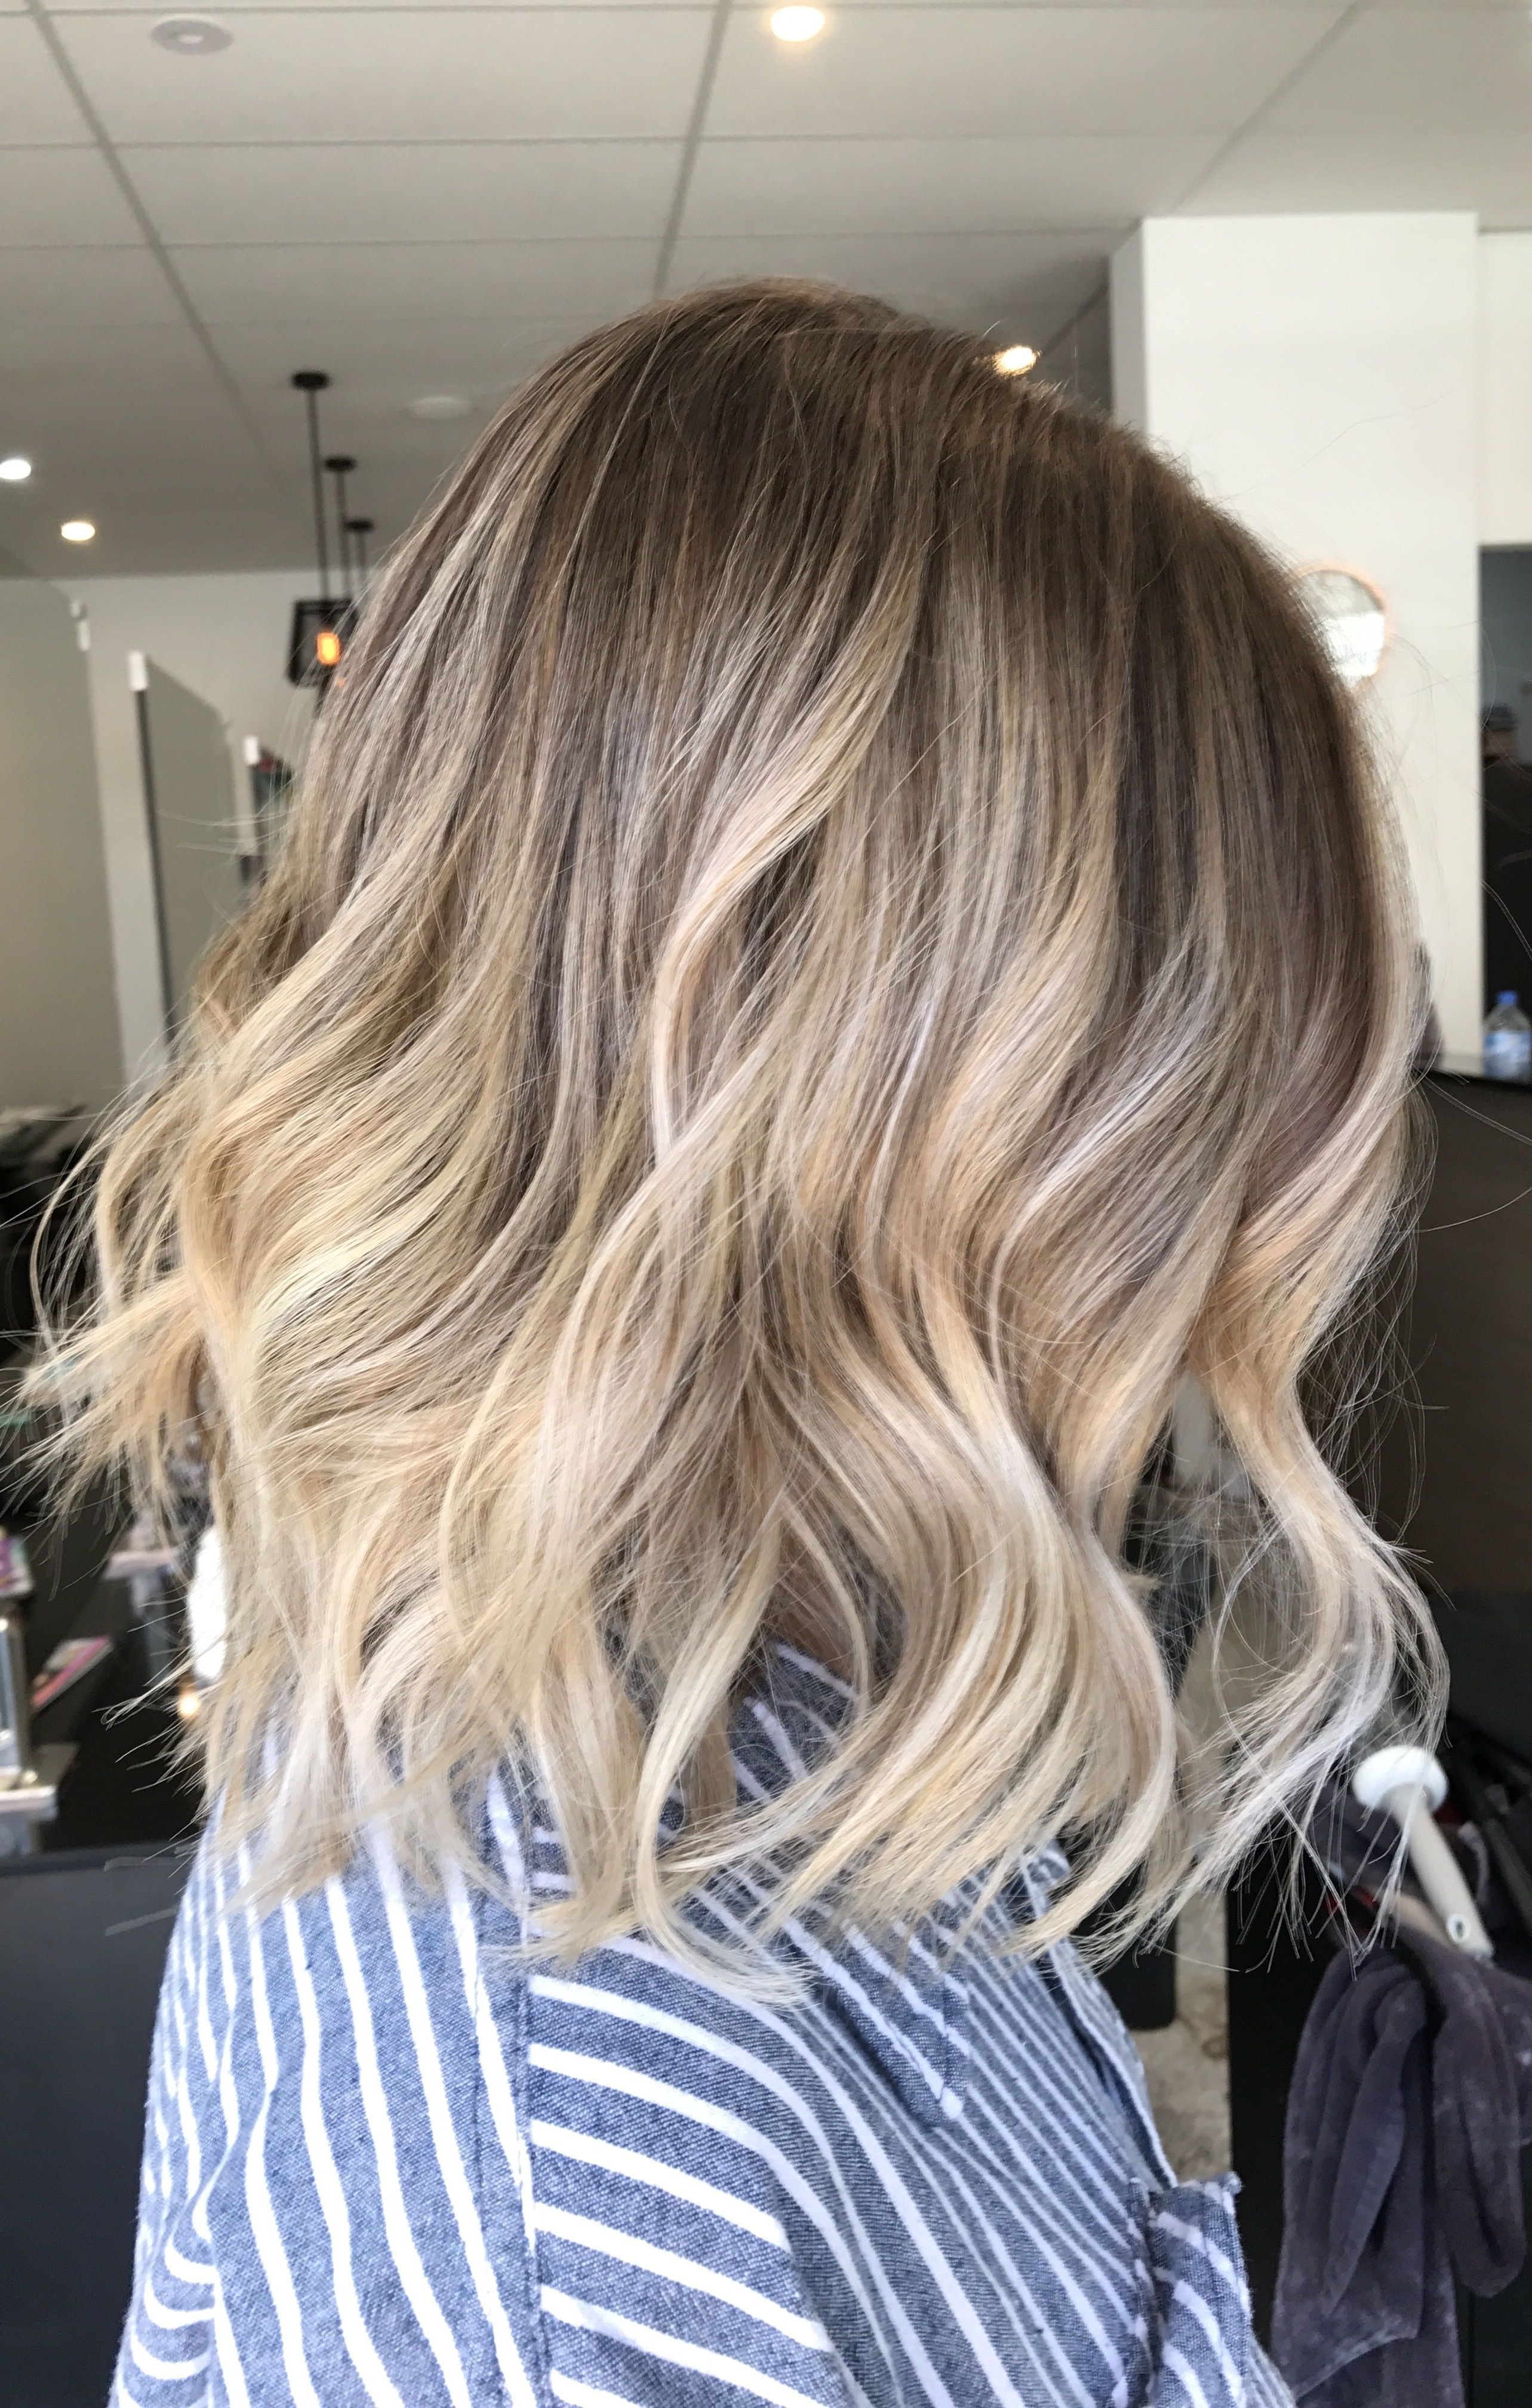 Fashionable Tousled Beach Babe Lob Blonde Hairstyles Intended For Lived In Hair Colour Blonde Bronde Brunette Golden Tones Balayage (View 19 of 20)